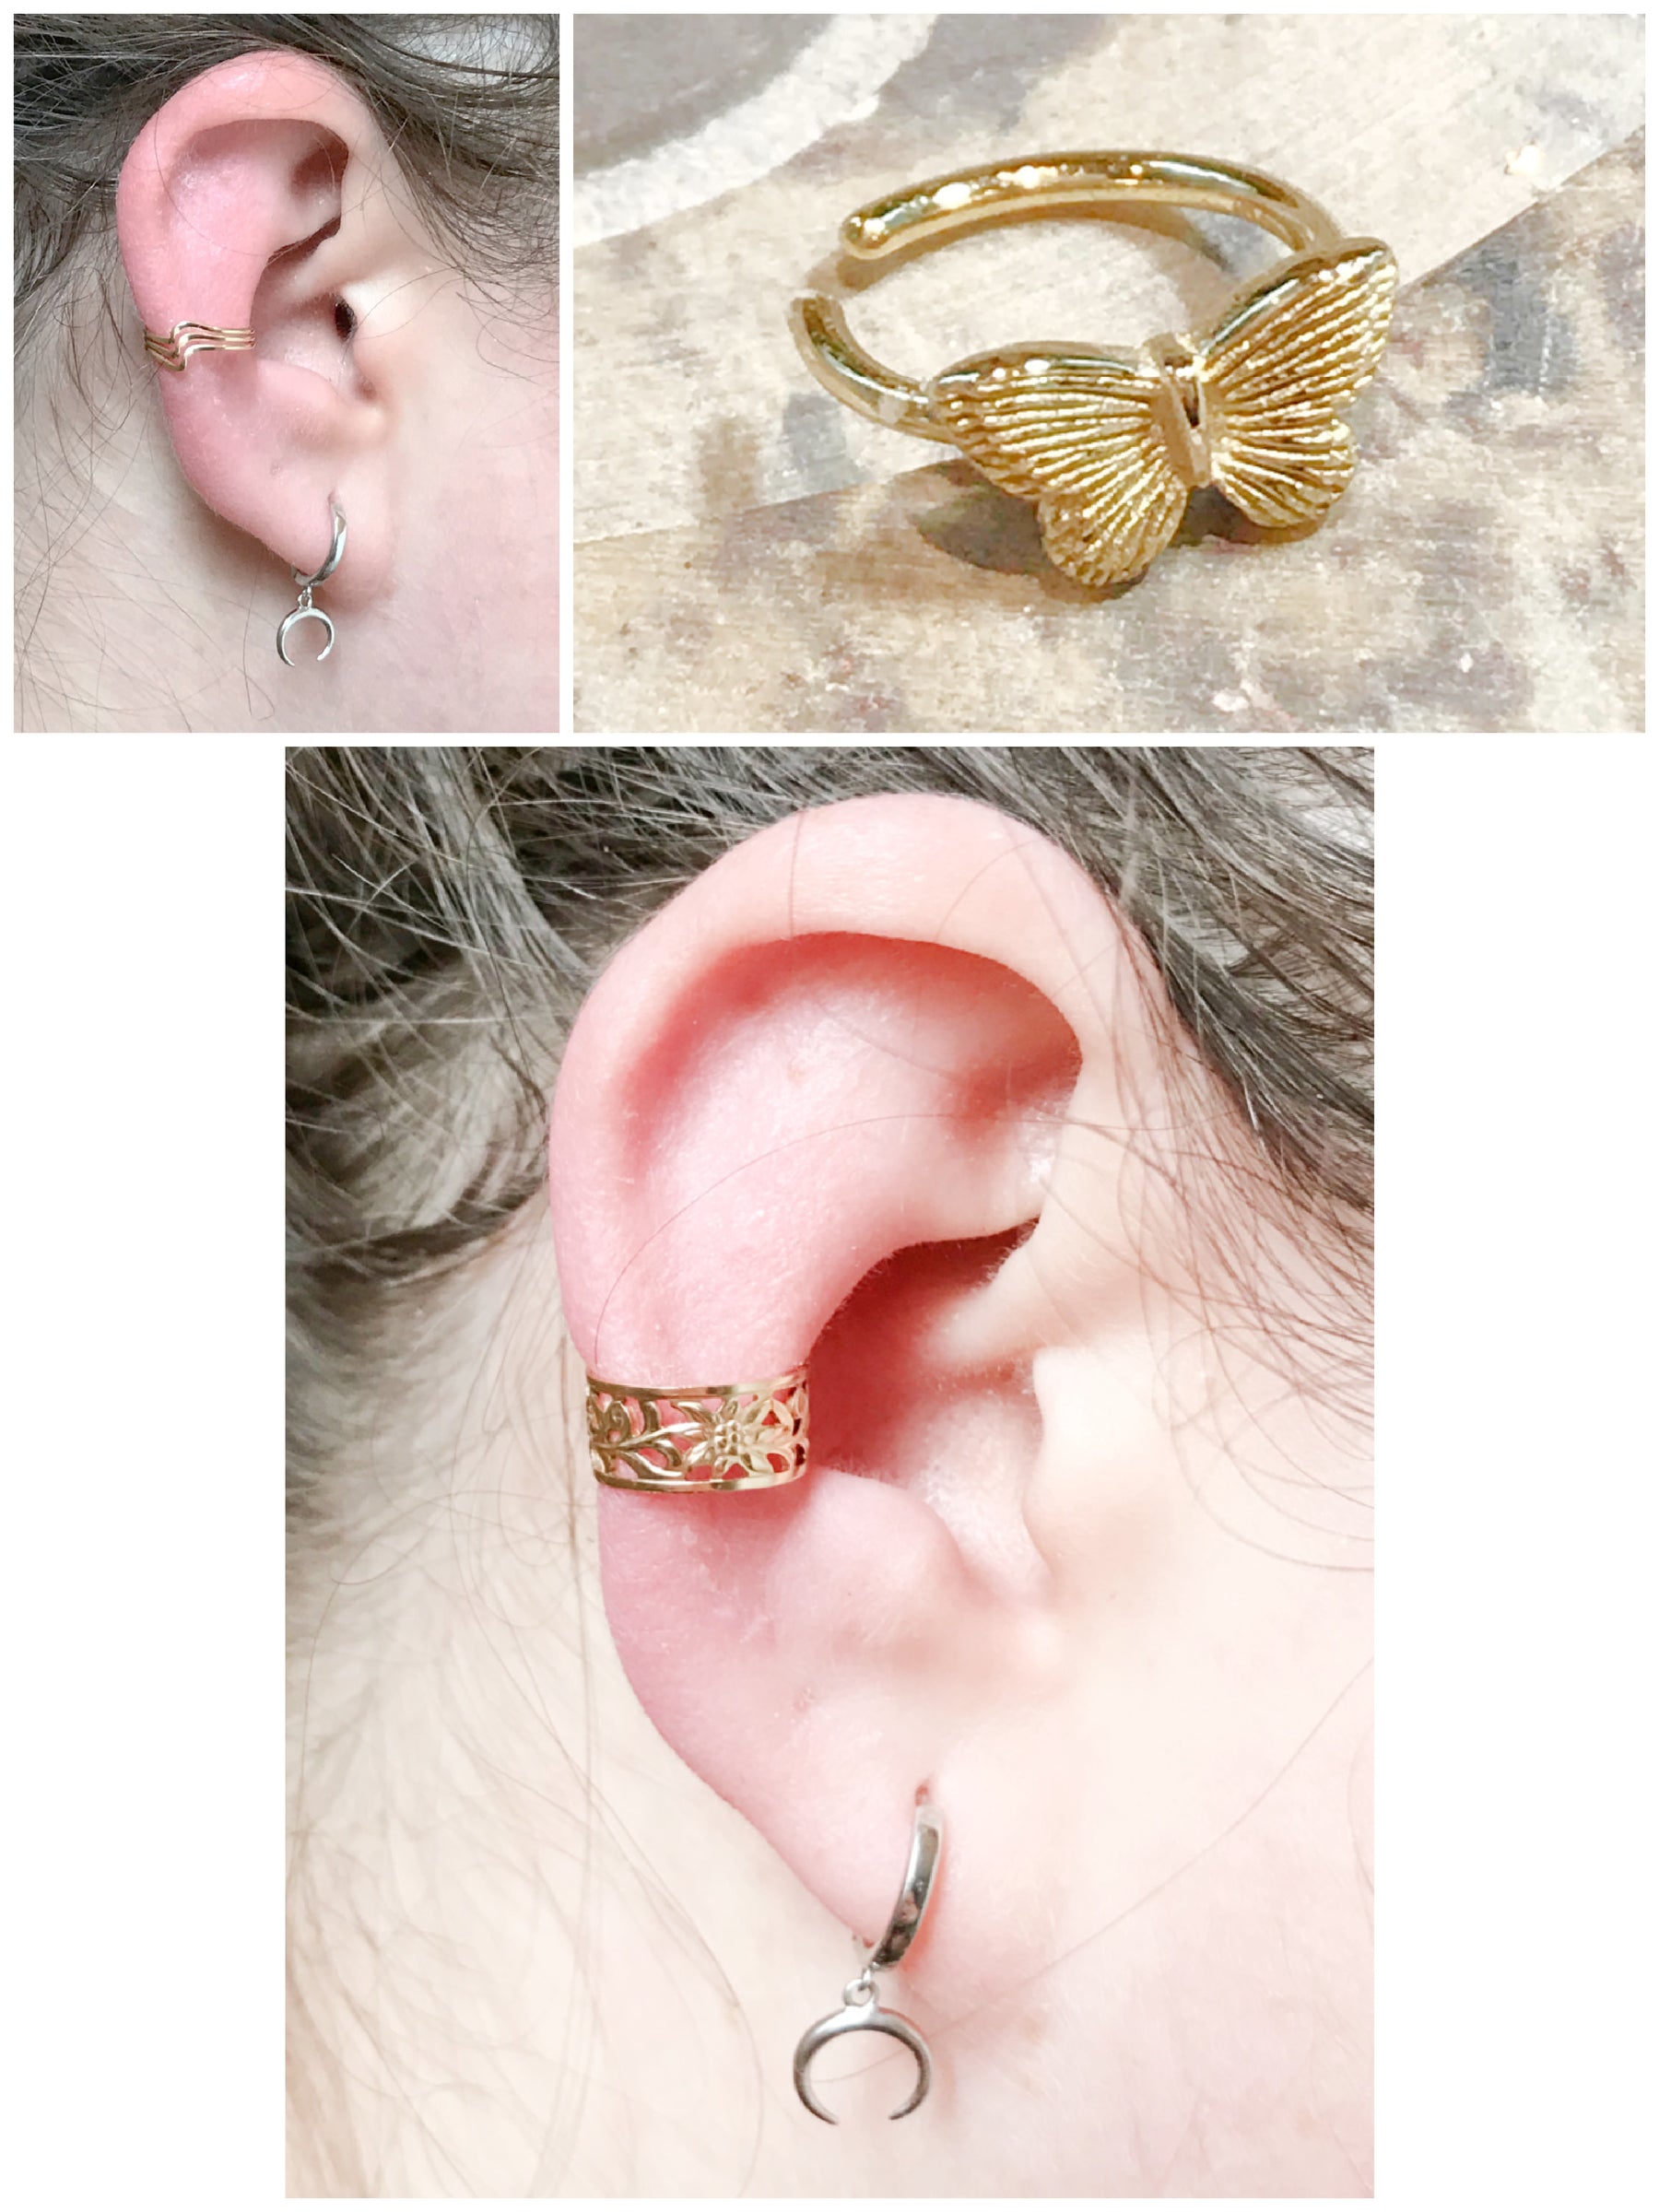 A collage of three images featuring ear cuffs